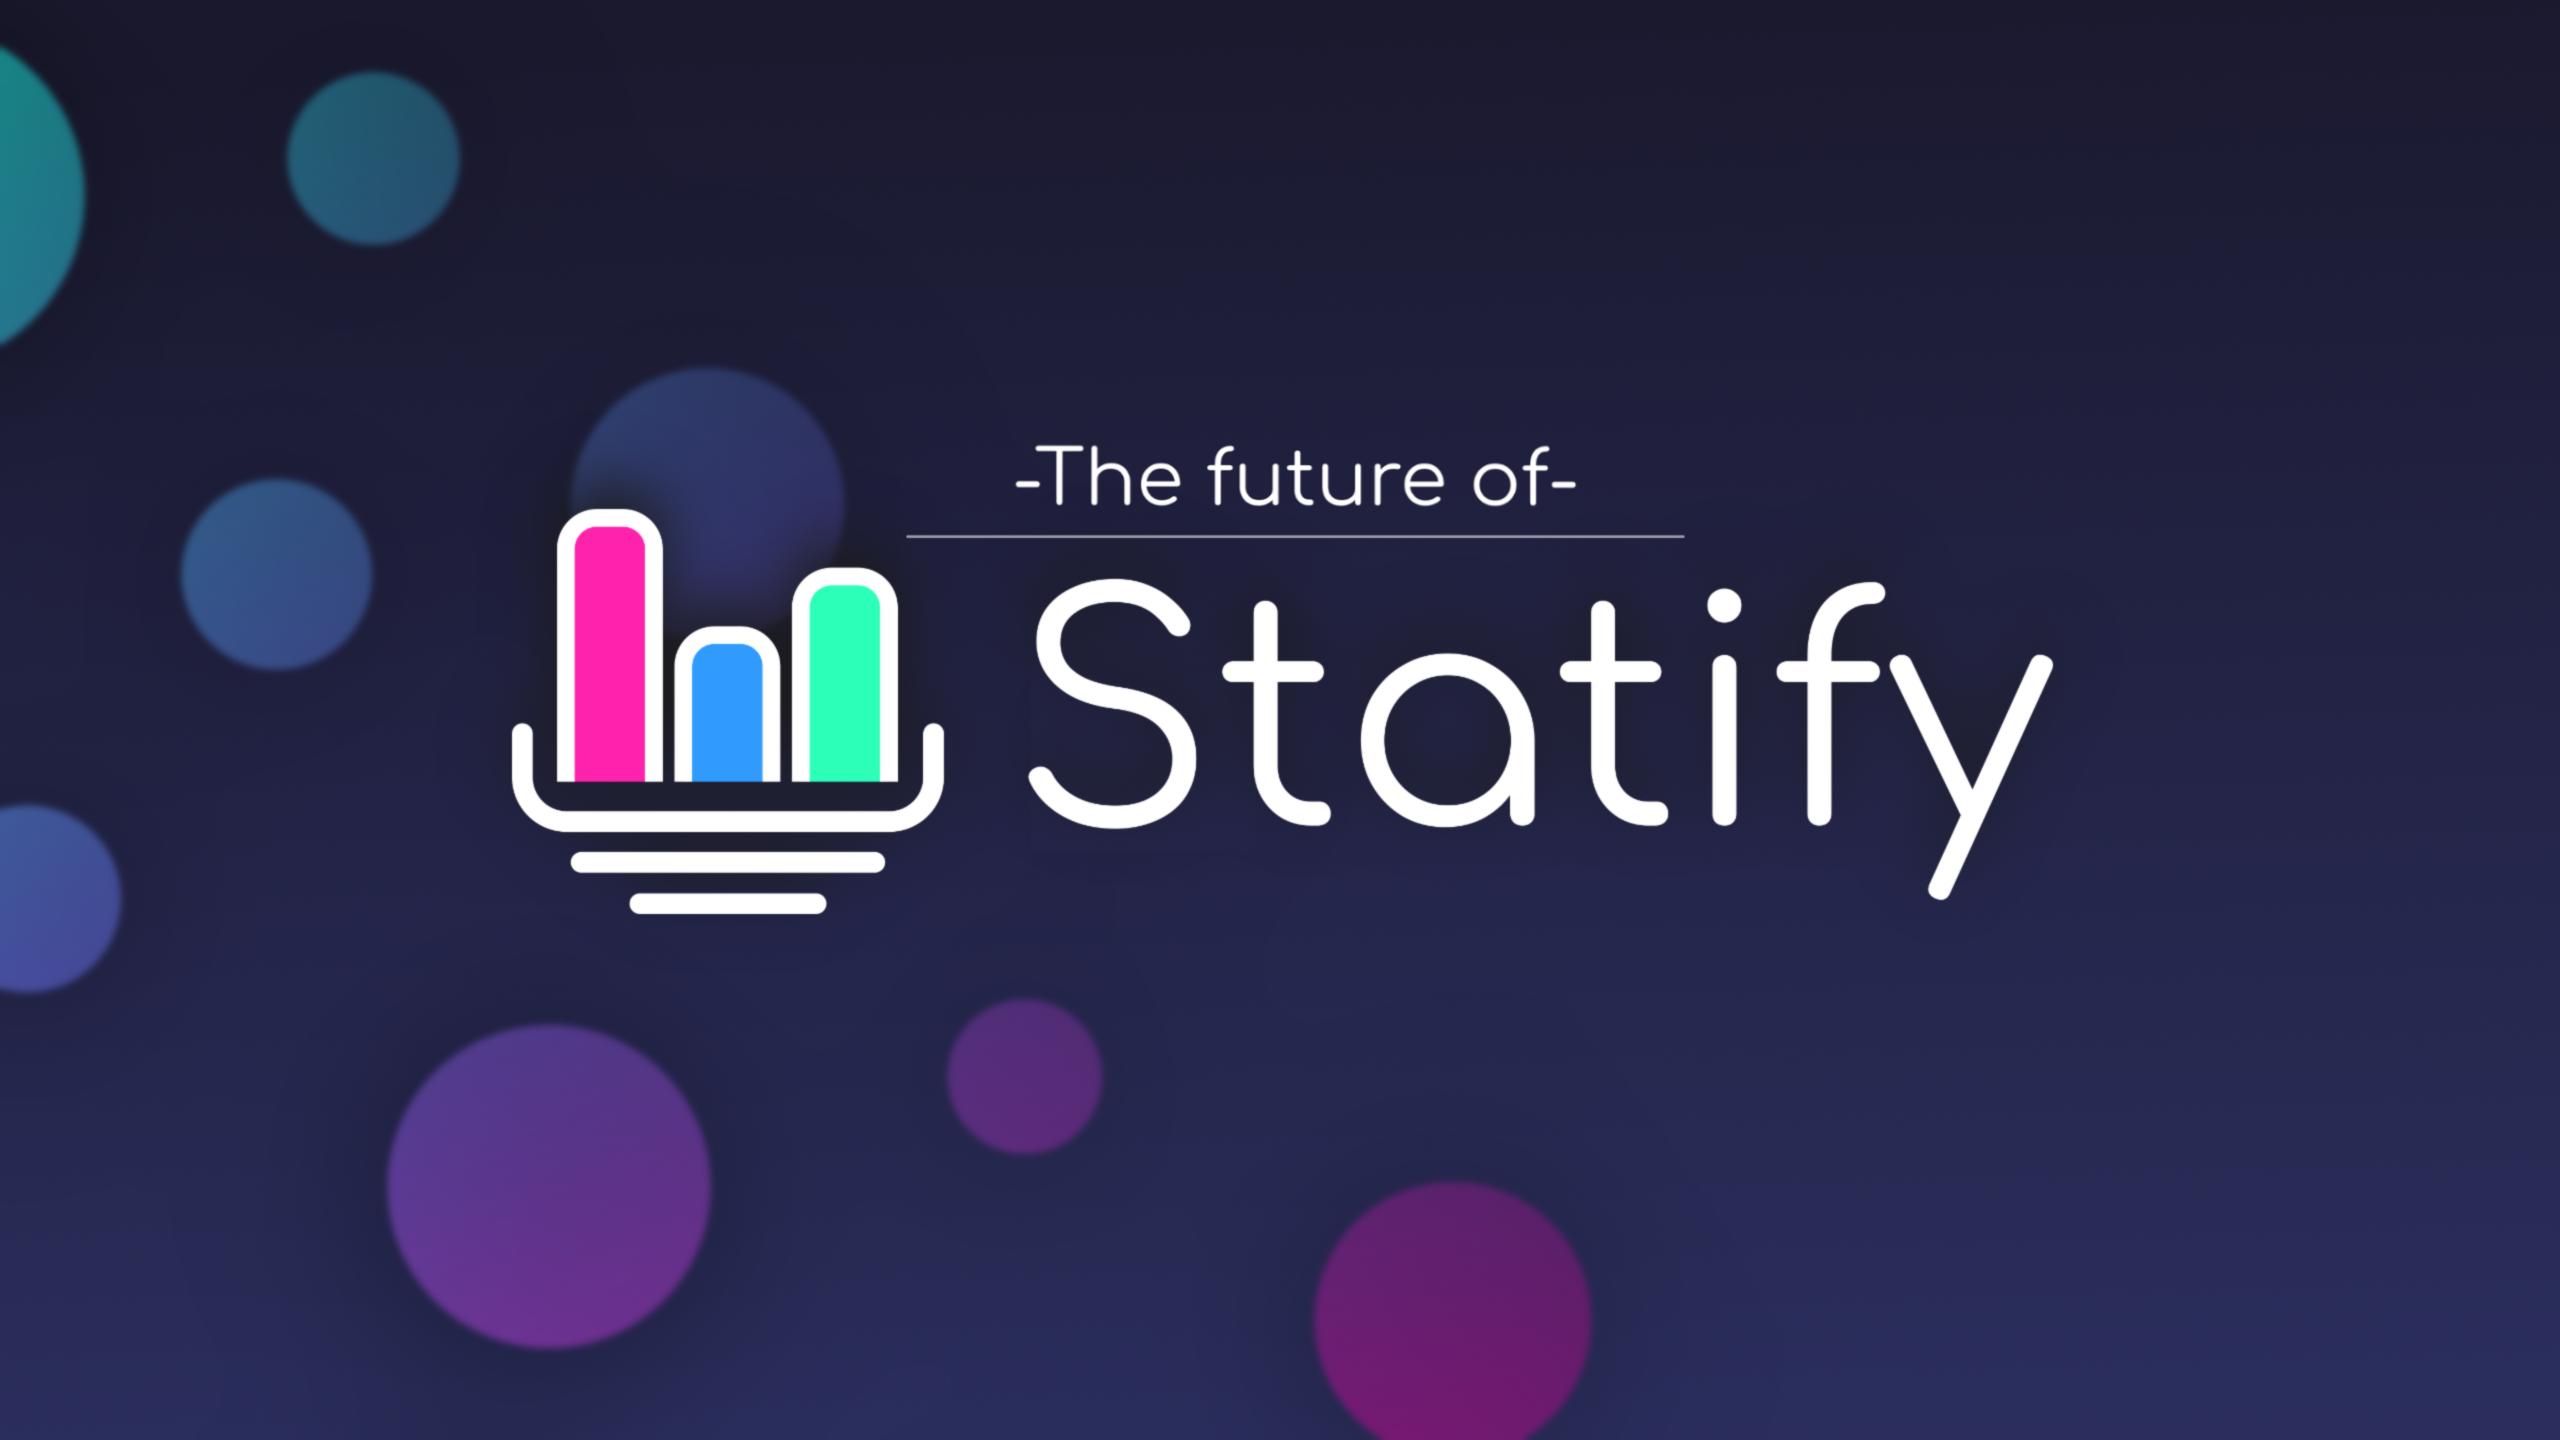 The future of Statify